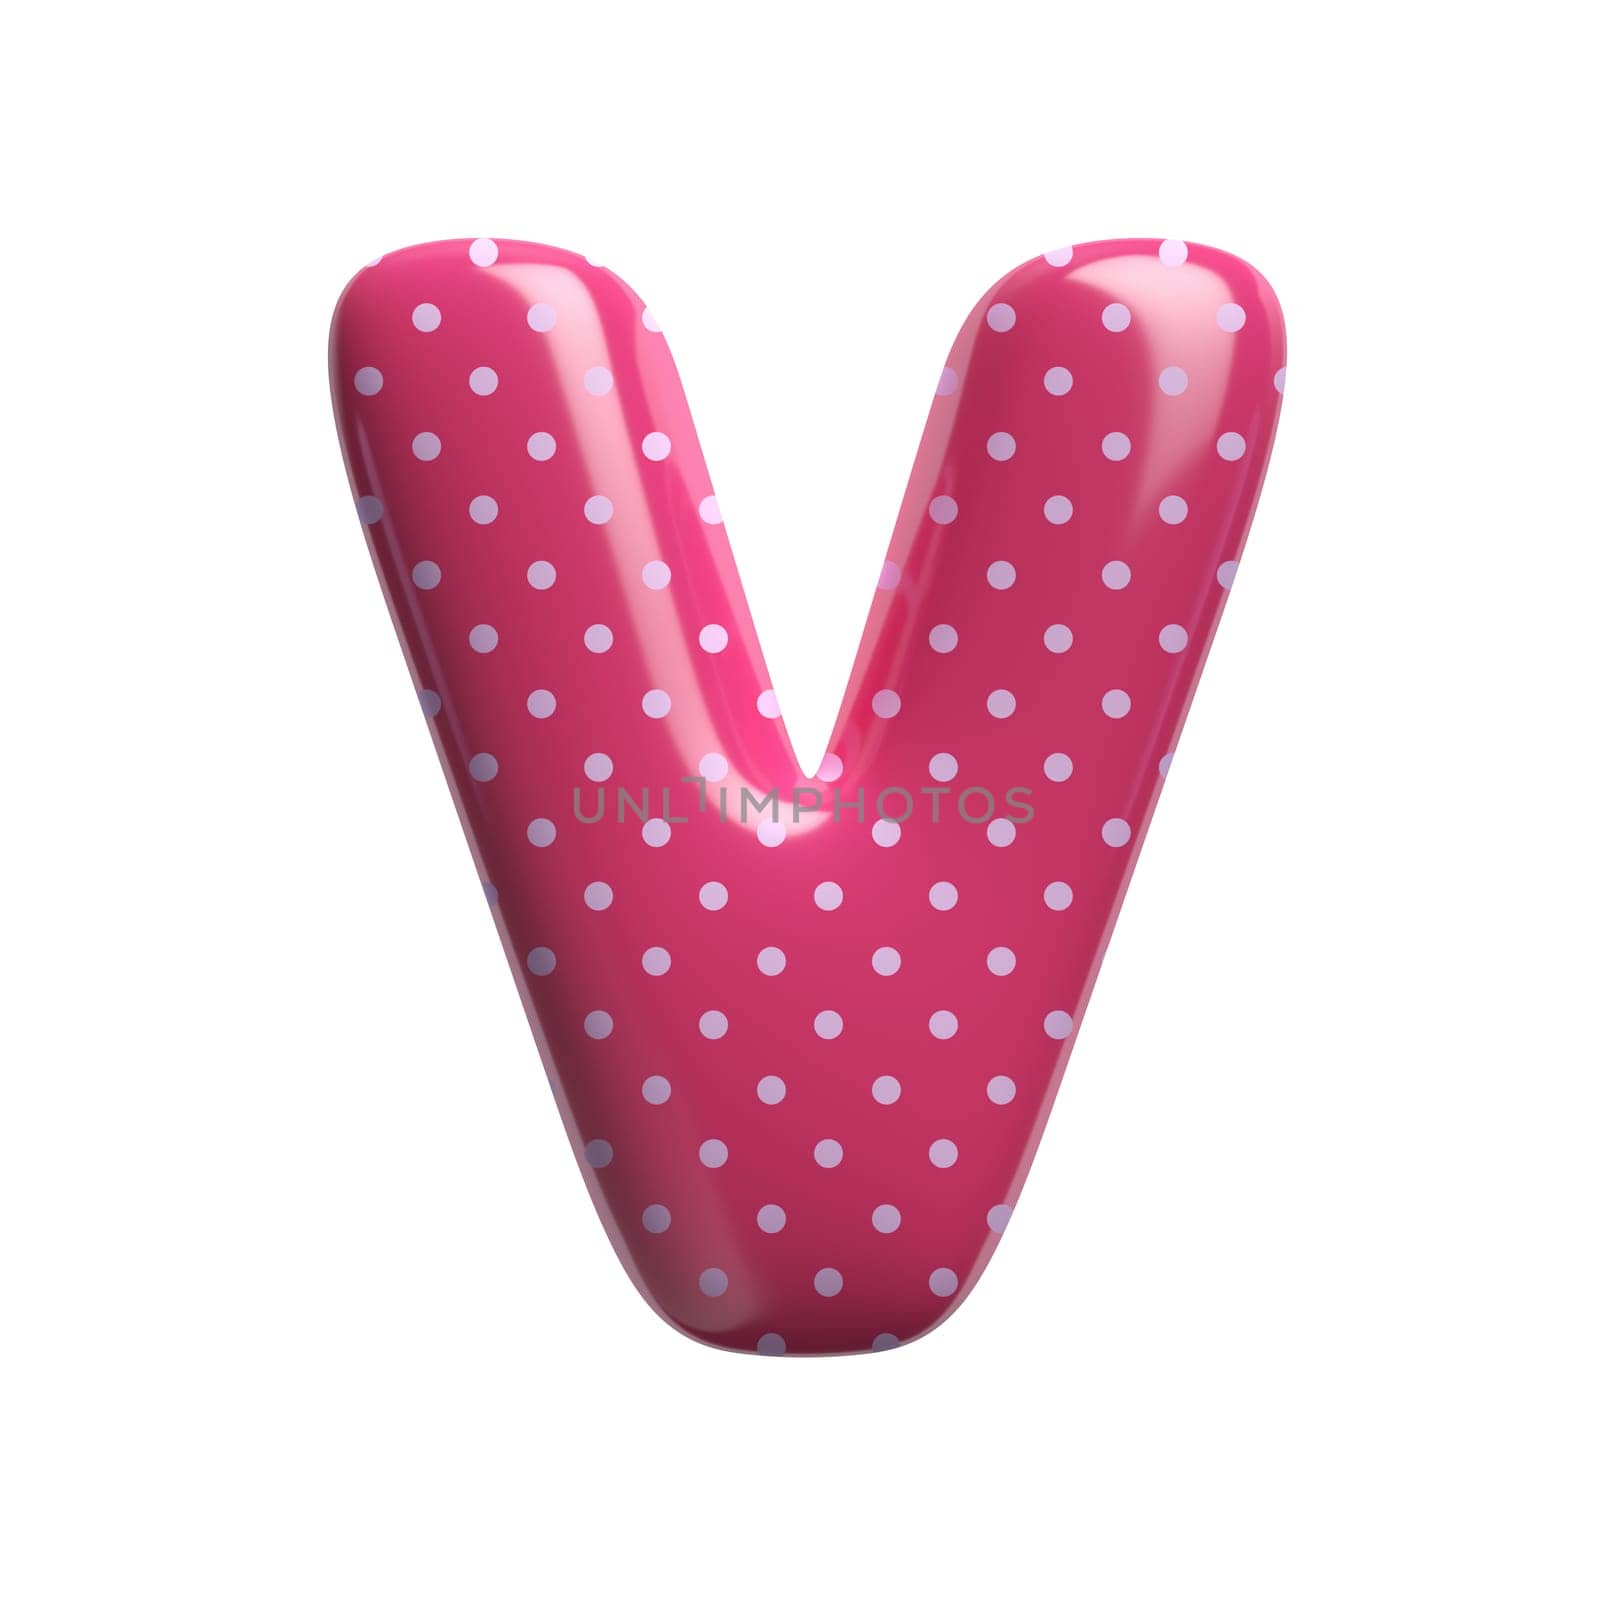 Polka dot letter V - Upper-case 3d pink retro font - suitable for Fashion, retro design or decoration related subjects by chrisroll